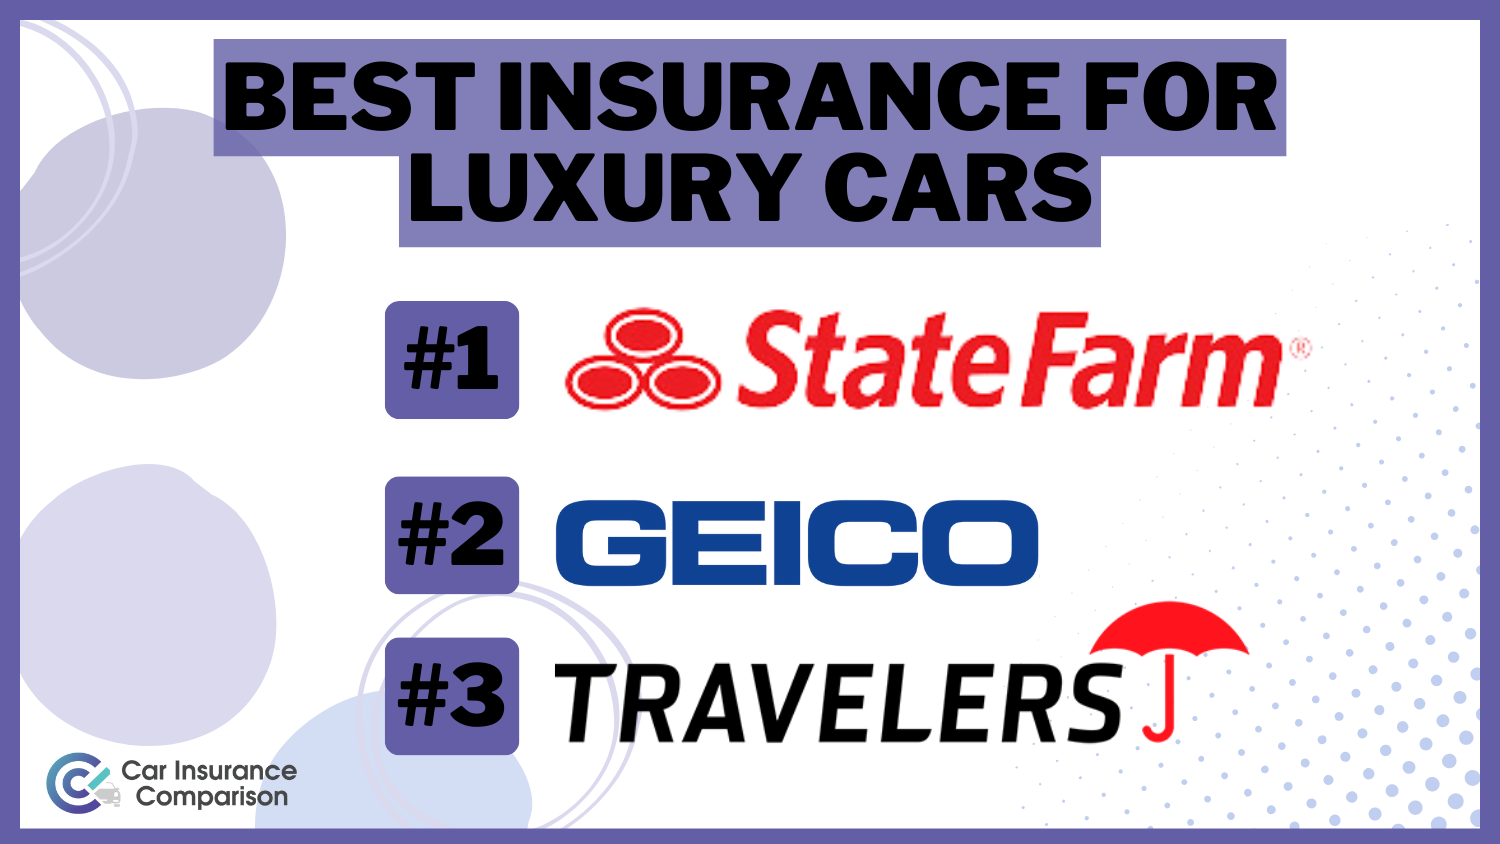 State Farm, Geico, and Travelers: Best Insurance for Luxury Cars